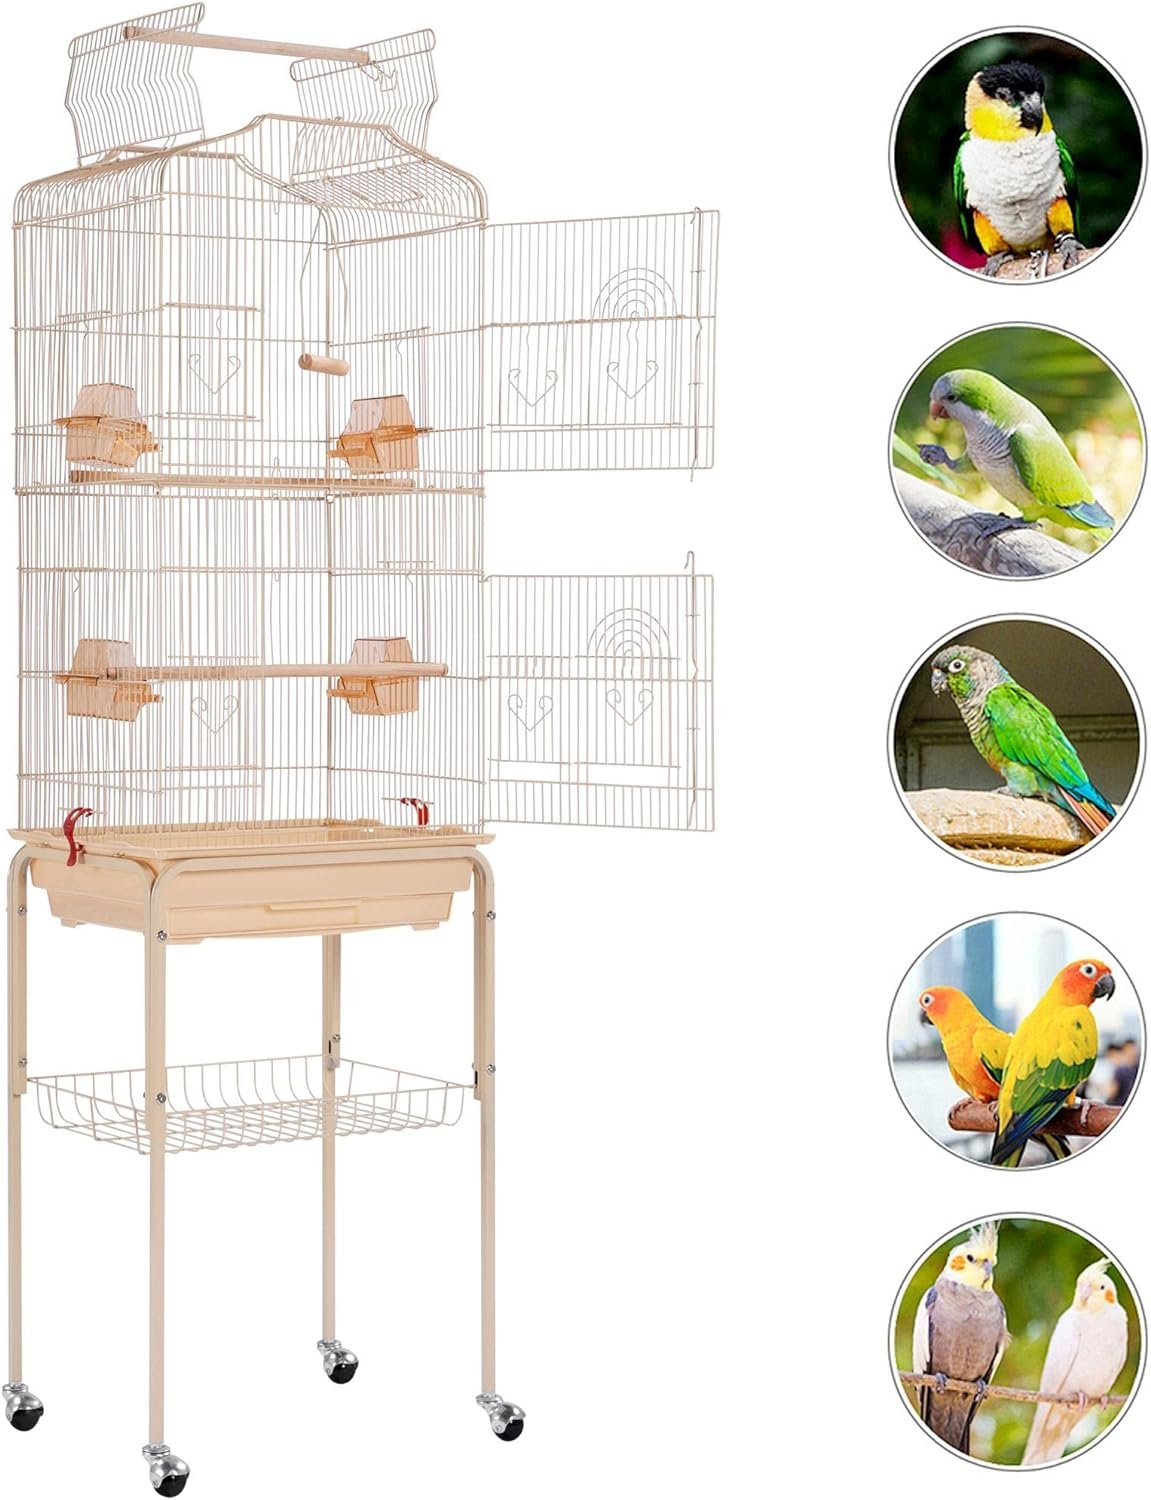 Yaheetech 64-inch Open Play Top Bird Cages for Parakeets Cockatiels Finches Lovebirds Canaries Conures Budgies Parrot Birdcage w/Detachable Rolling Stand, White